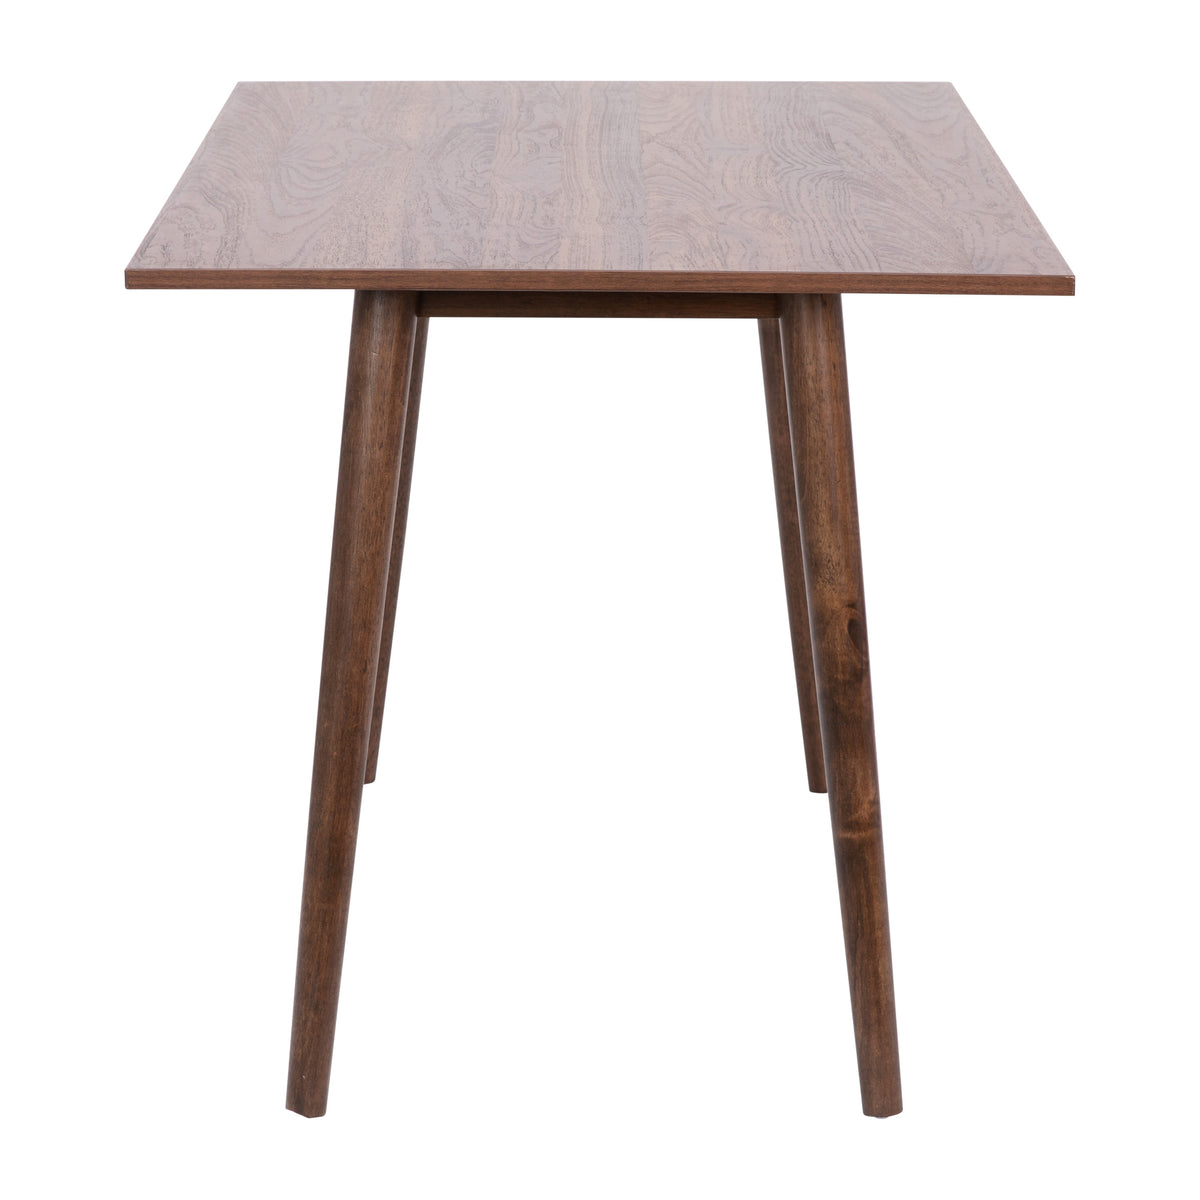 Mid-Century Modern Wooden Dining Table with Tapered Legs in Dark Walnut-Seats 4